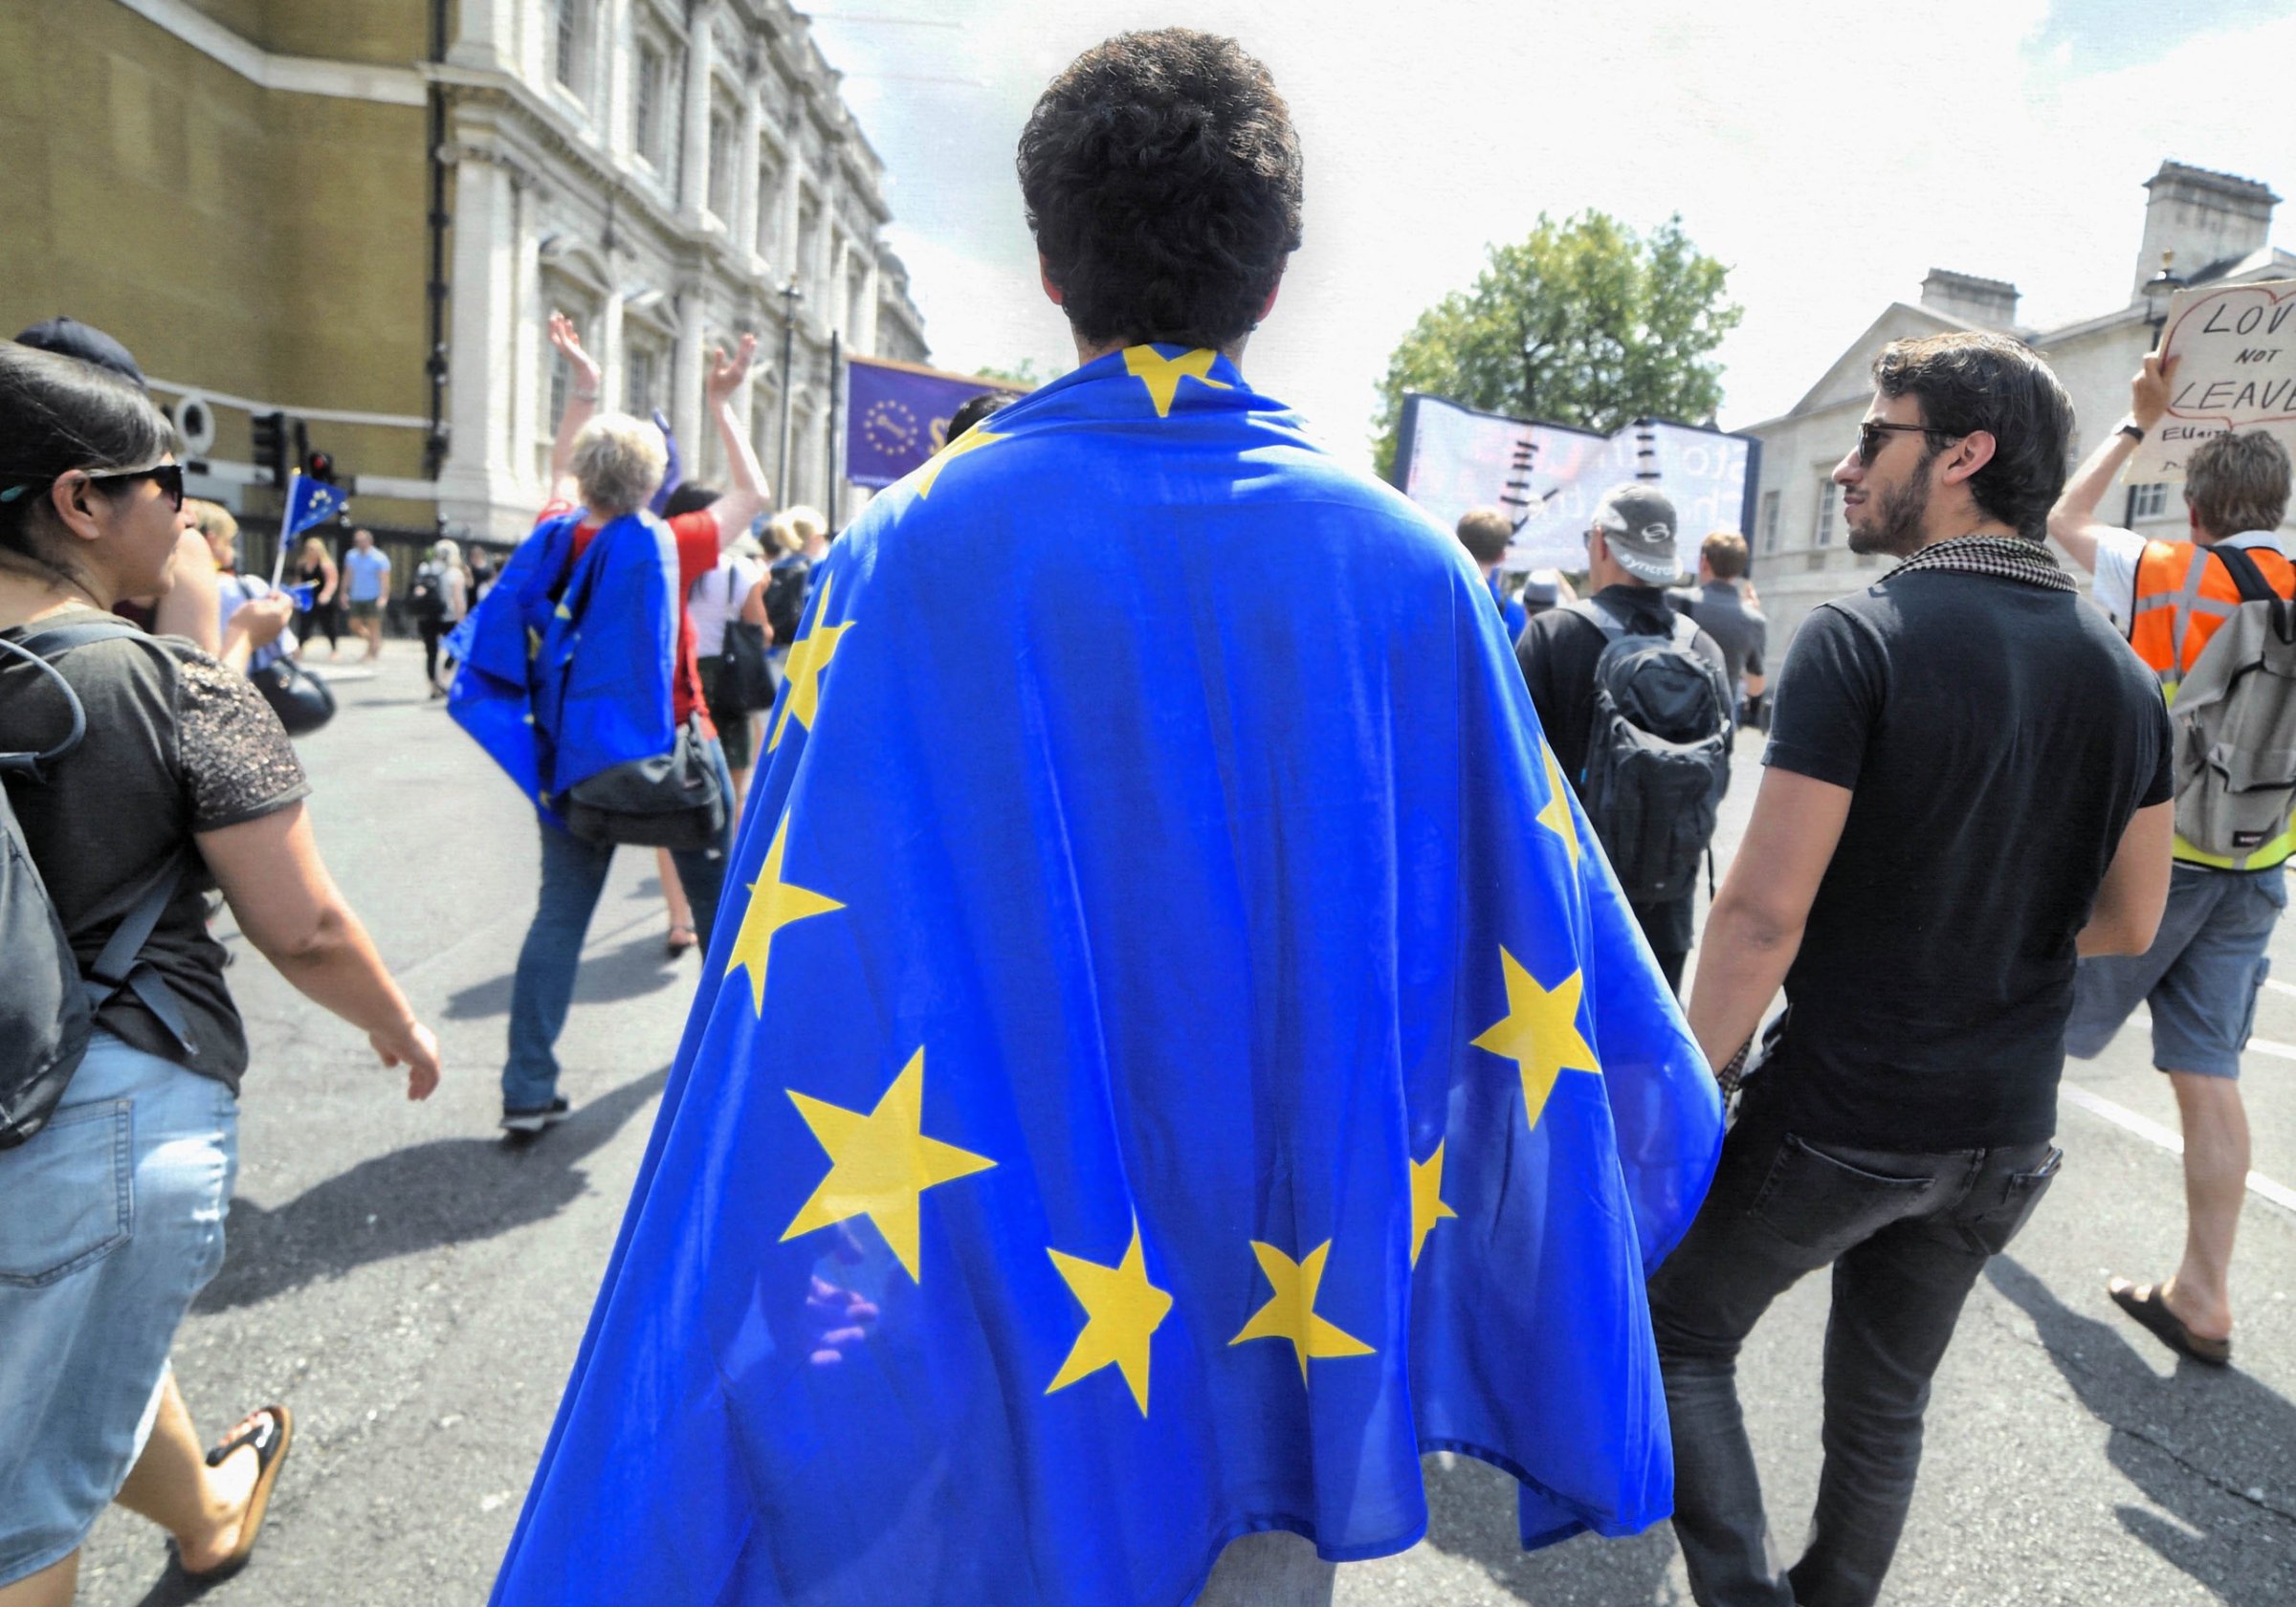 Hundreds of Pro-European campaigners marched to 10 Downing Street in London on July 23, 2016.